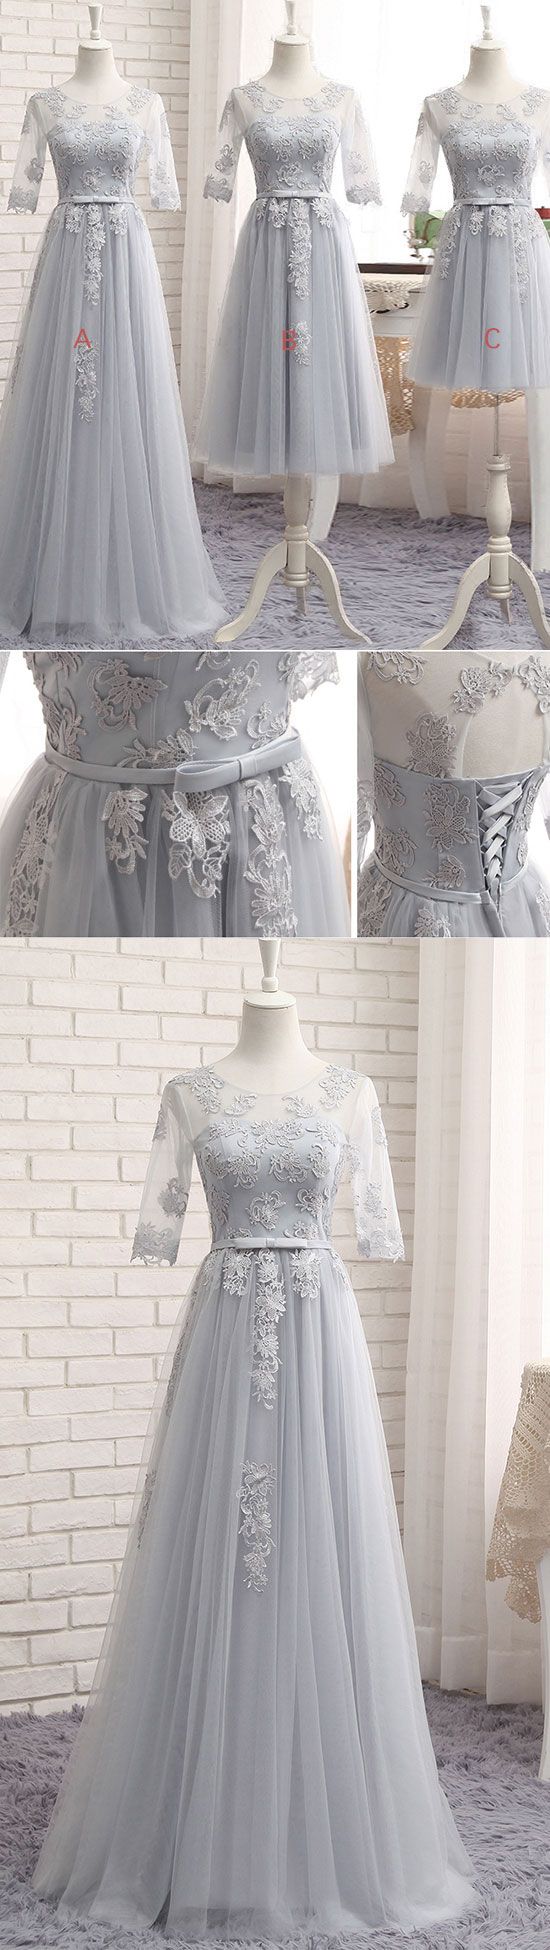 Gray Tulle Lace Long Prom Dress, Gray Bridesmaid Dress, Gray Tulle Lace Long Wedding Party Dress,pd14112